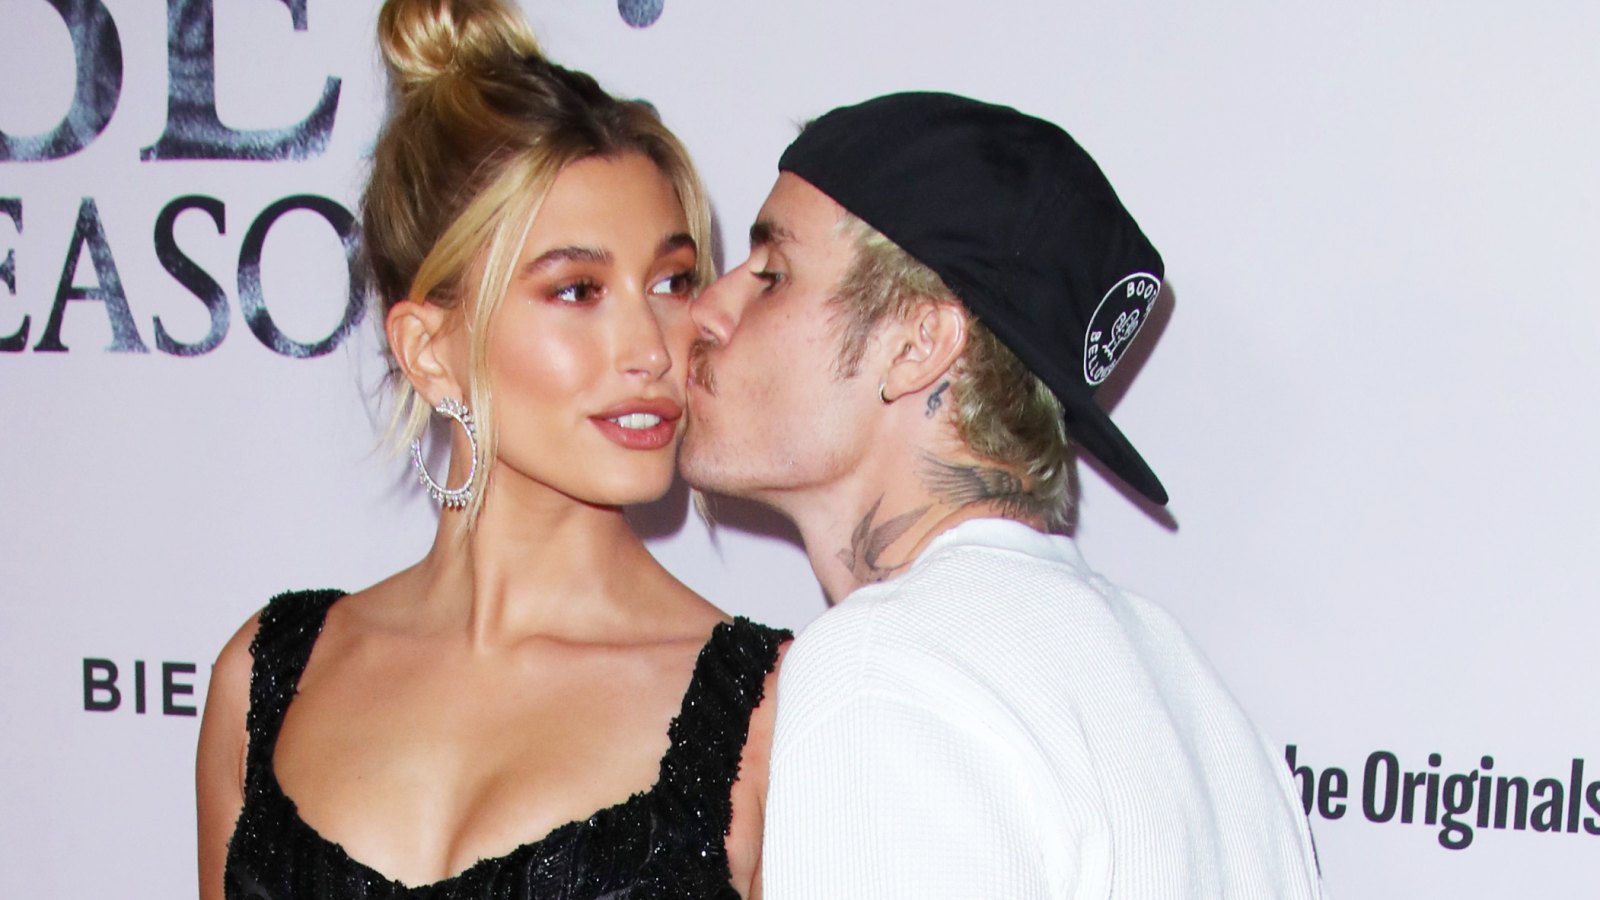 Hailey Baldwin Recalls Her First Kiss With Justin Bieber That Almost Didn’t Happen